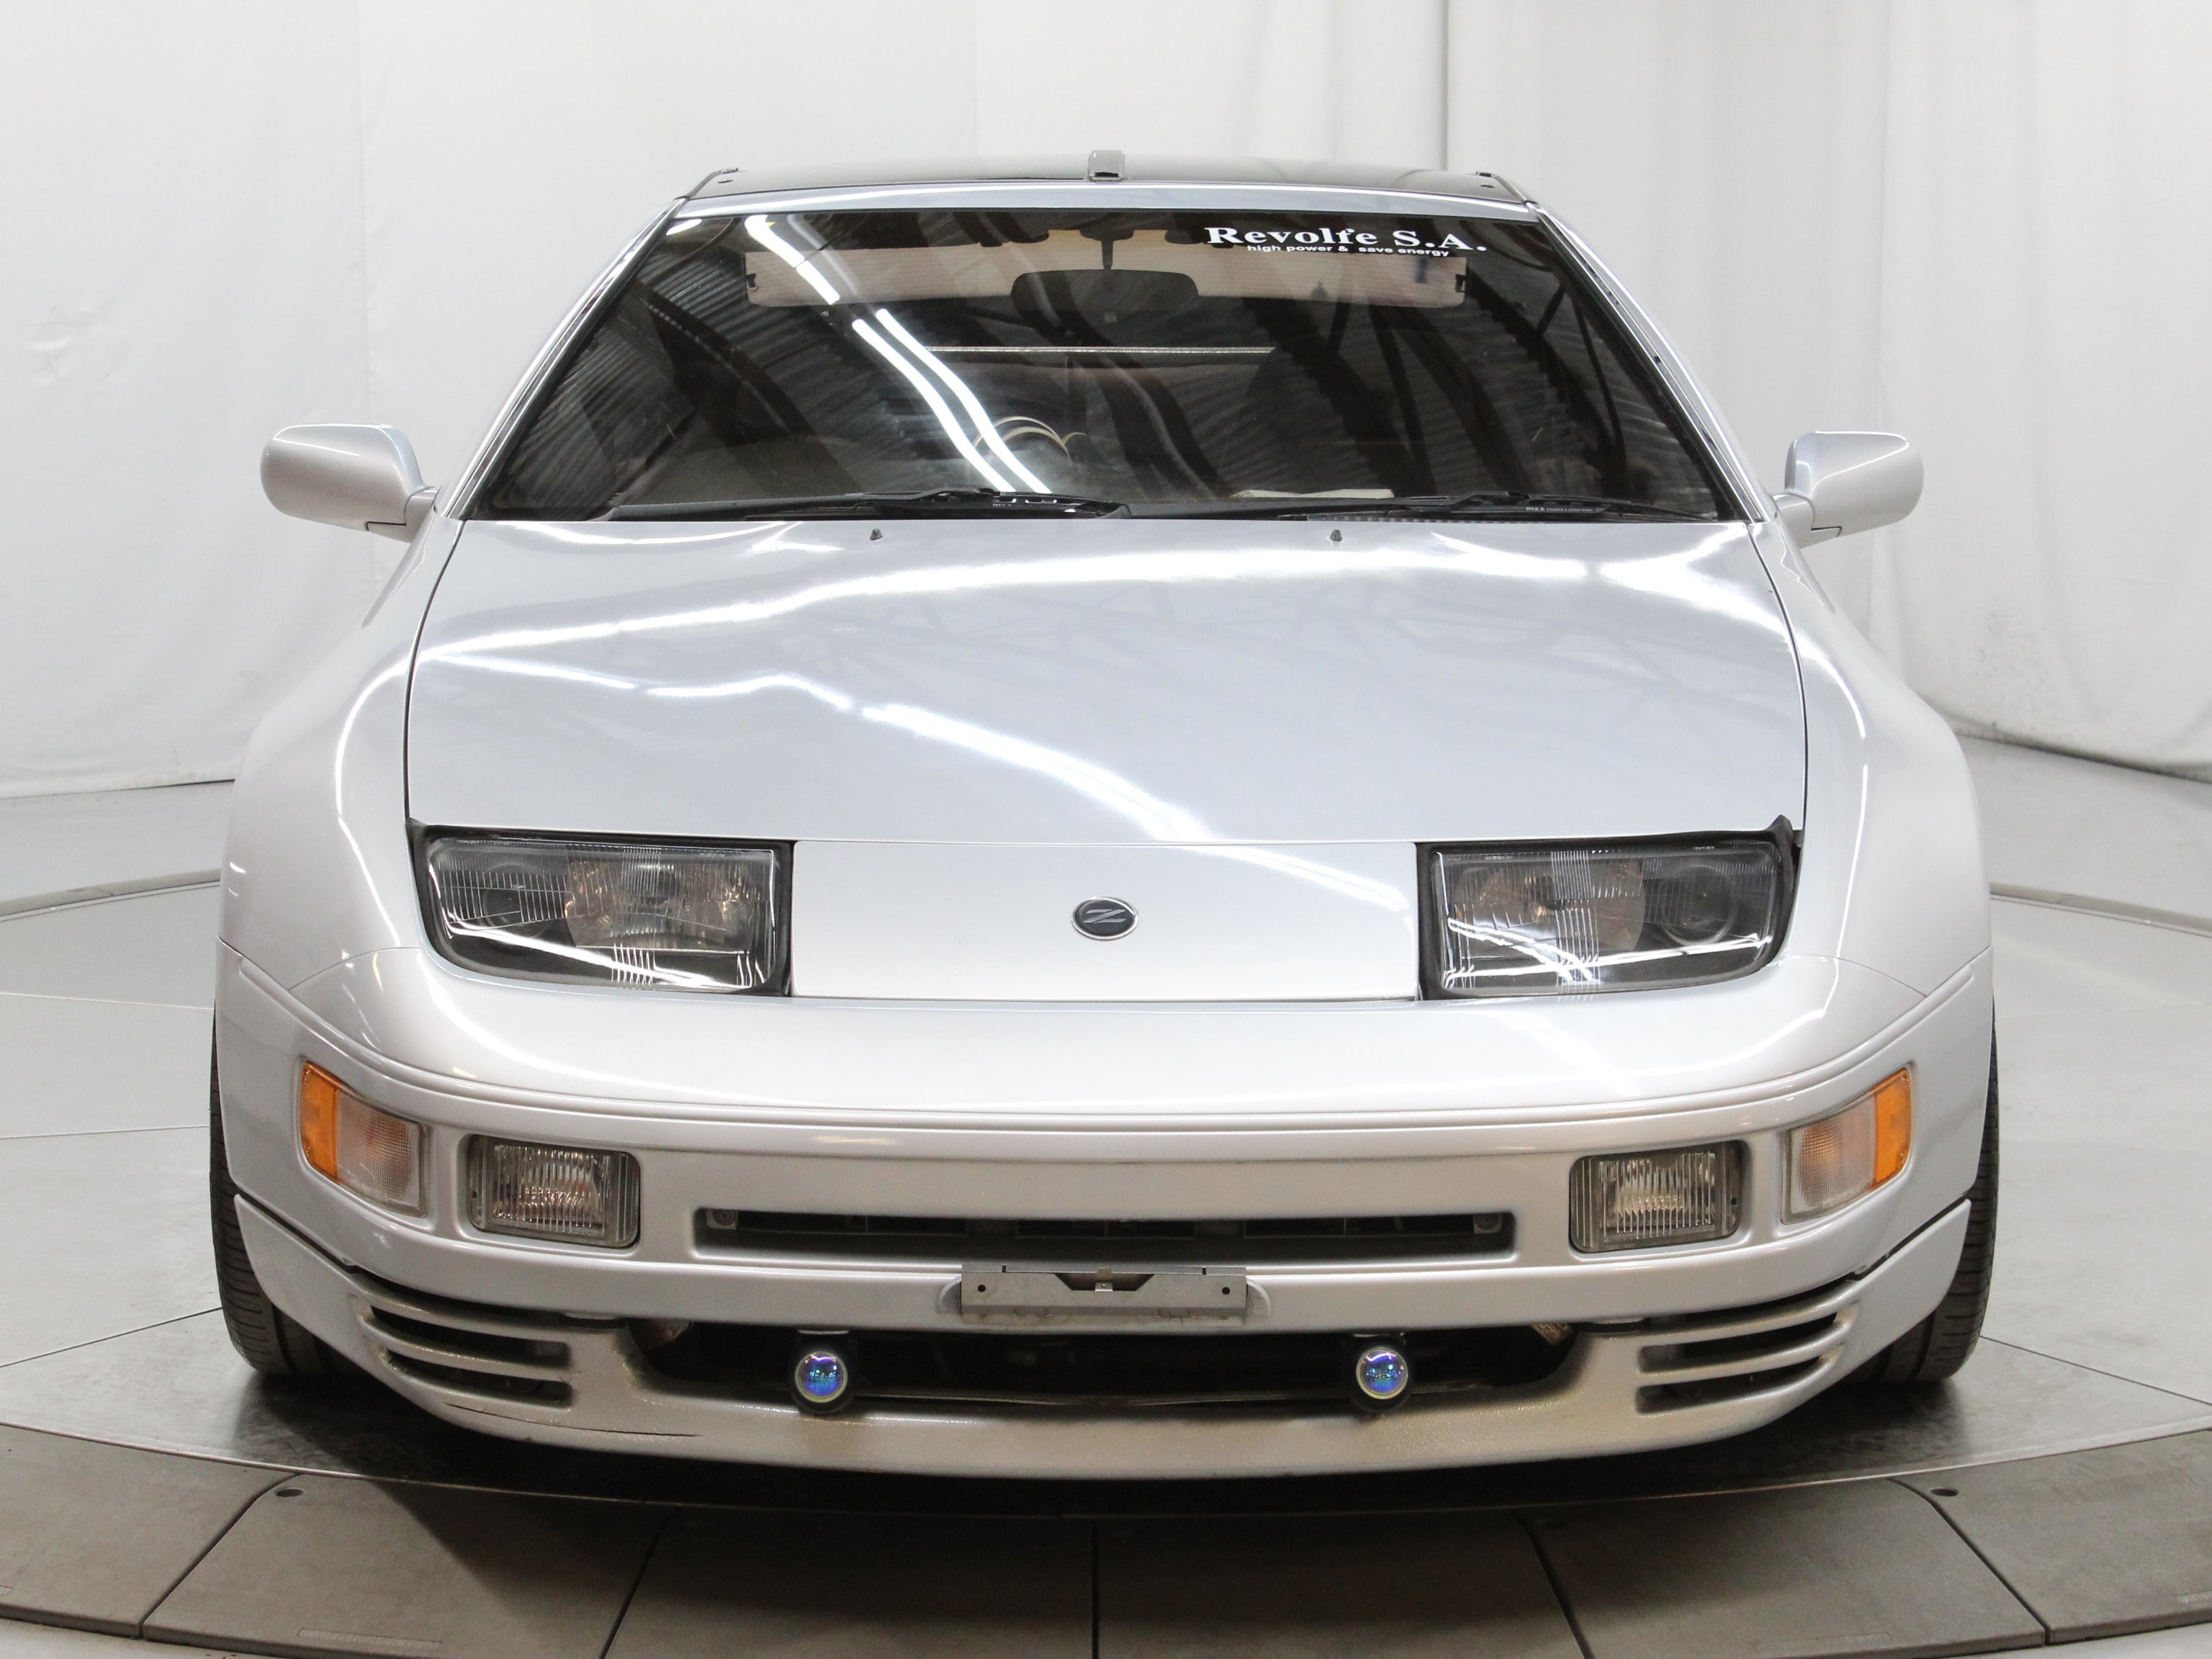 Used 1990 Nissan Fairlady Z 300ZX For Sale at Duncan Imports and 